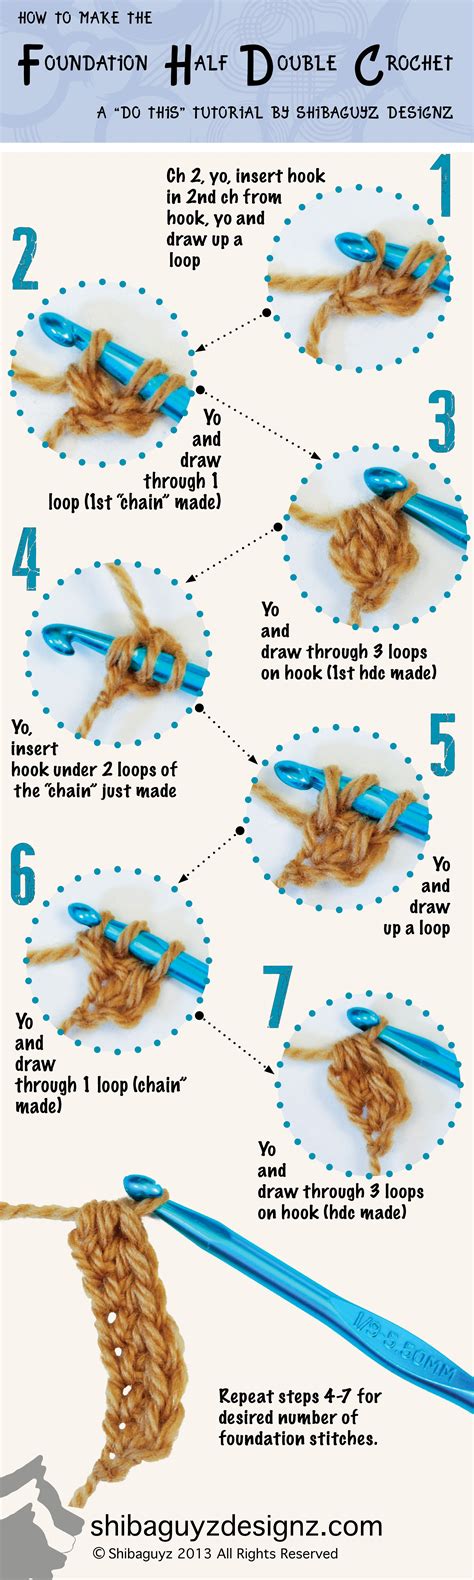 Half Double Crochet Infographic In 2020 With Images Hdc Crochet